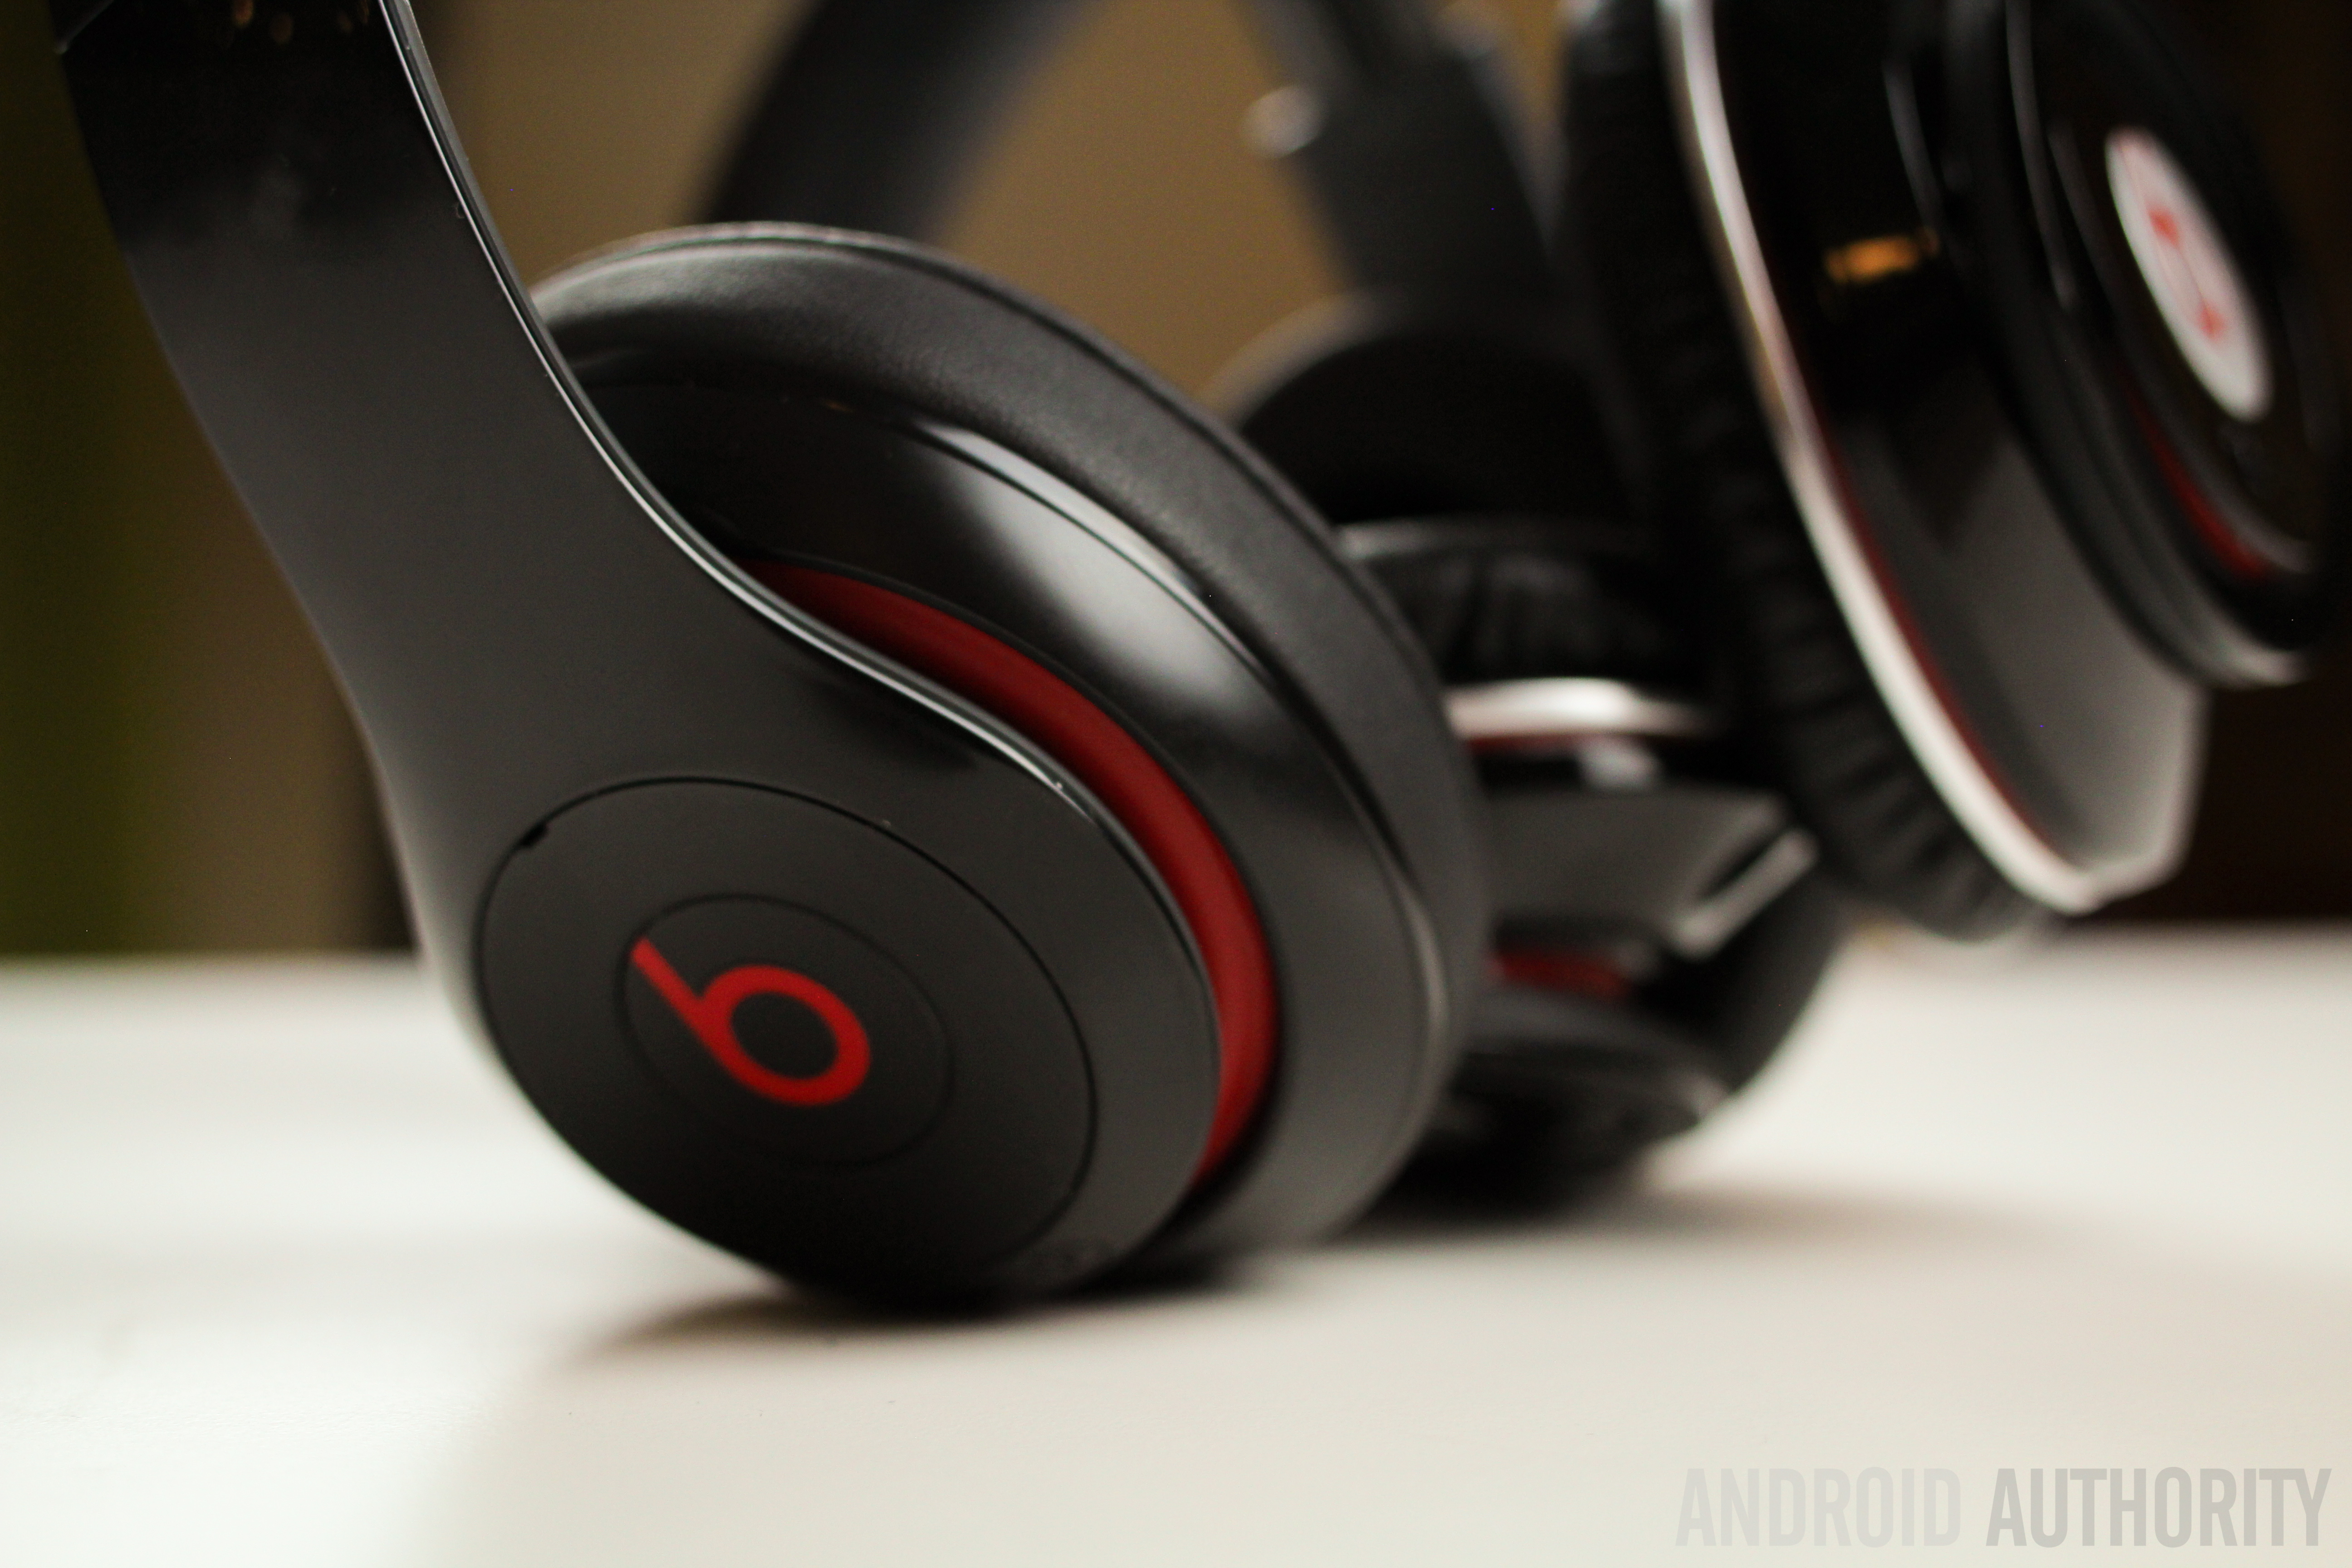 Beats Wireless By Dre Review Hands On AA-27